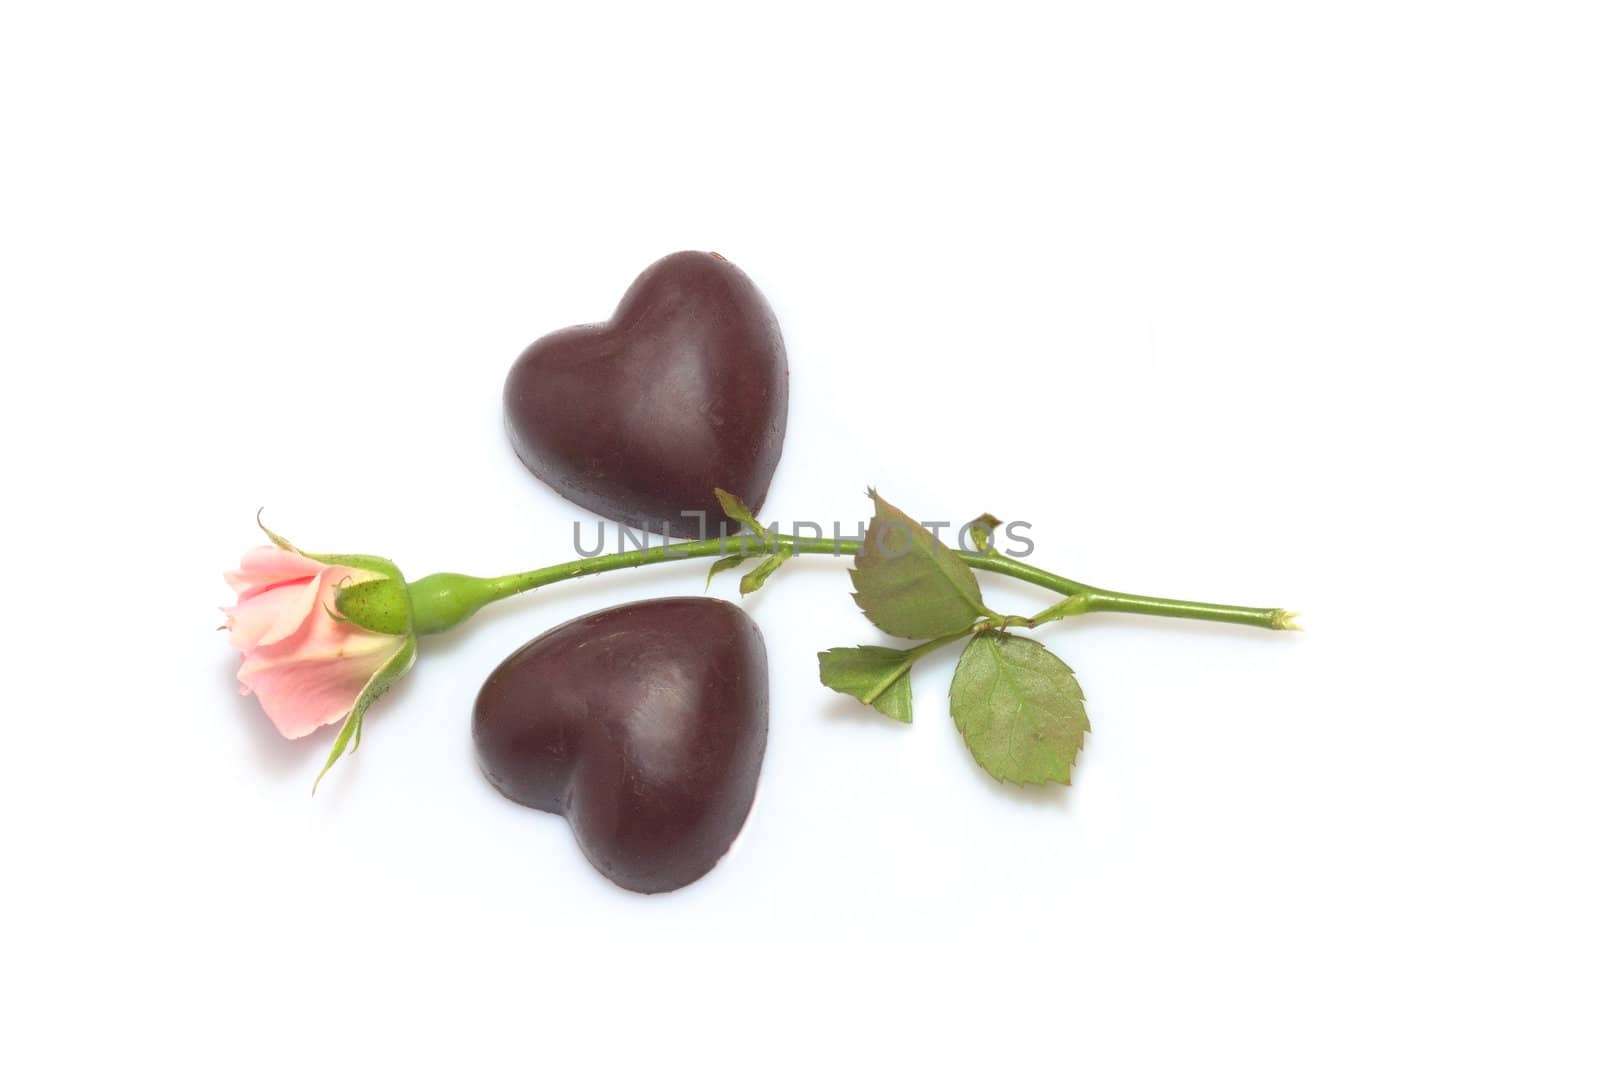 valentines day background - rose and two chocolate hearts